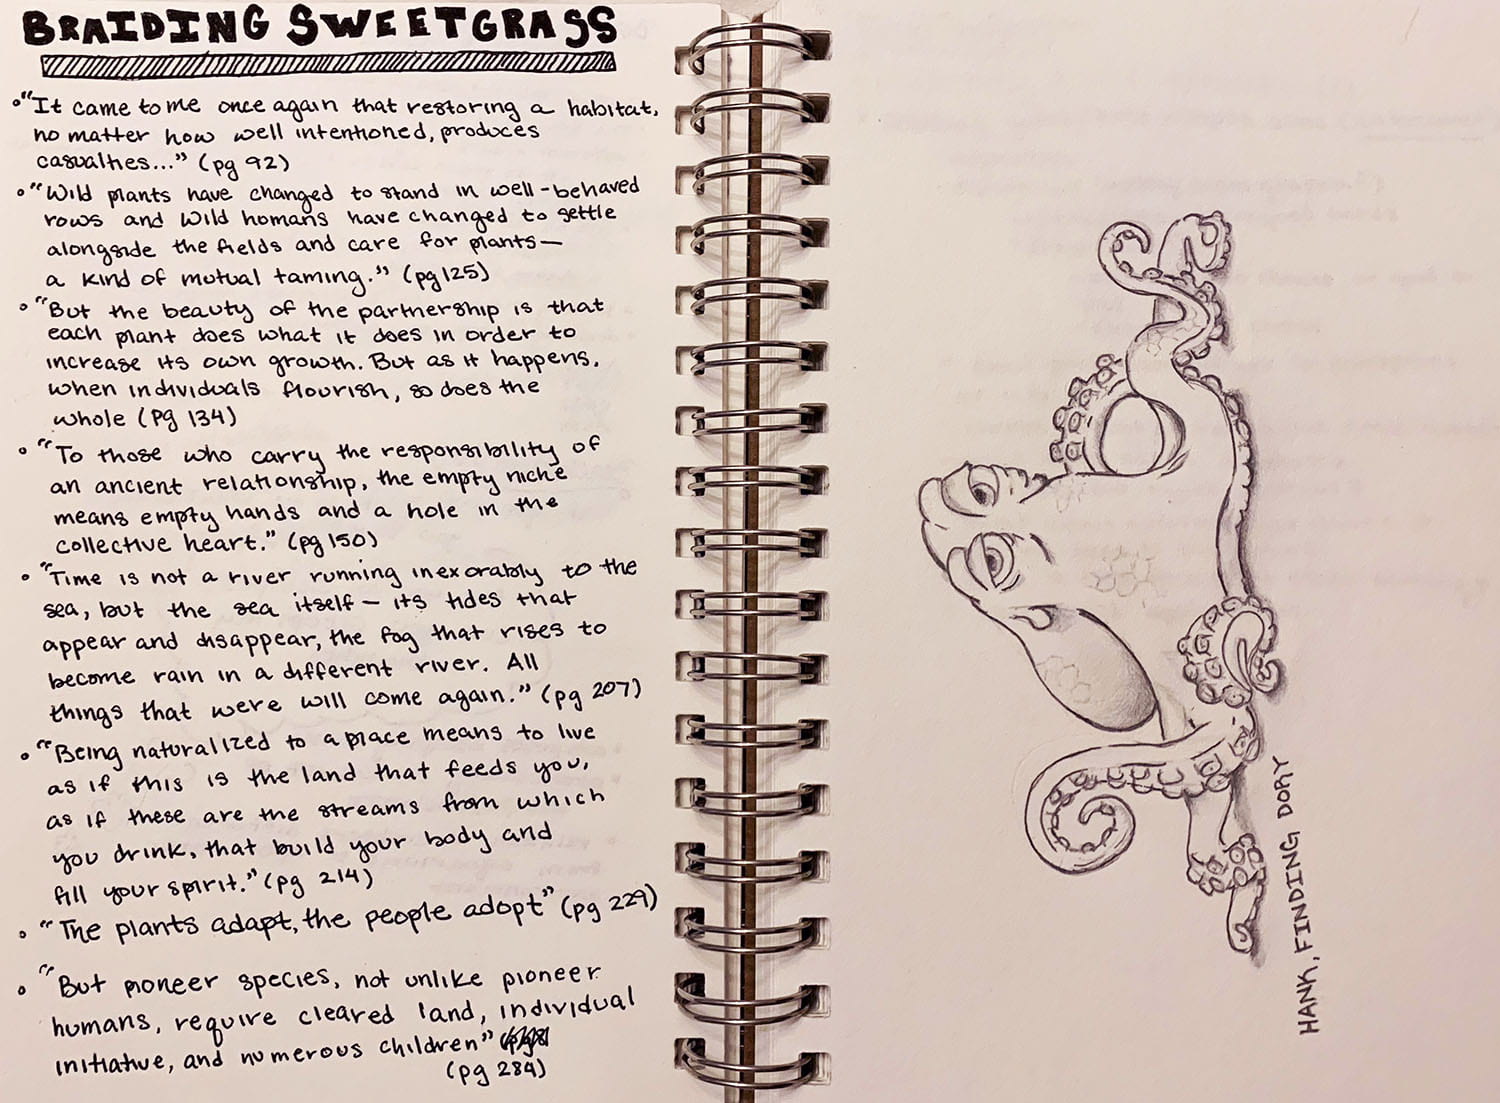 A page of handwritten notes about Braiding Sweetgrass, next to a page showing a drawing of an octopus labeled "Hank, finding Dory"